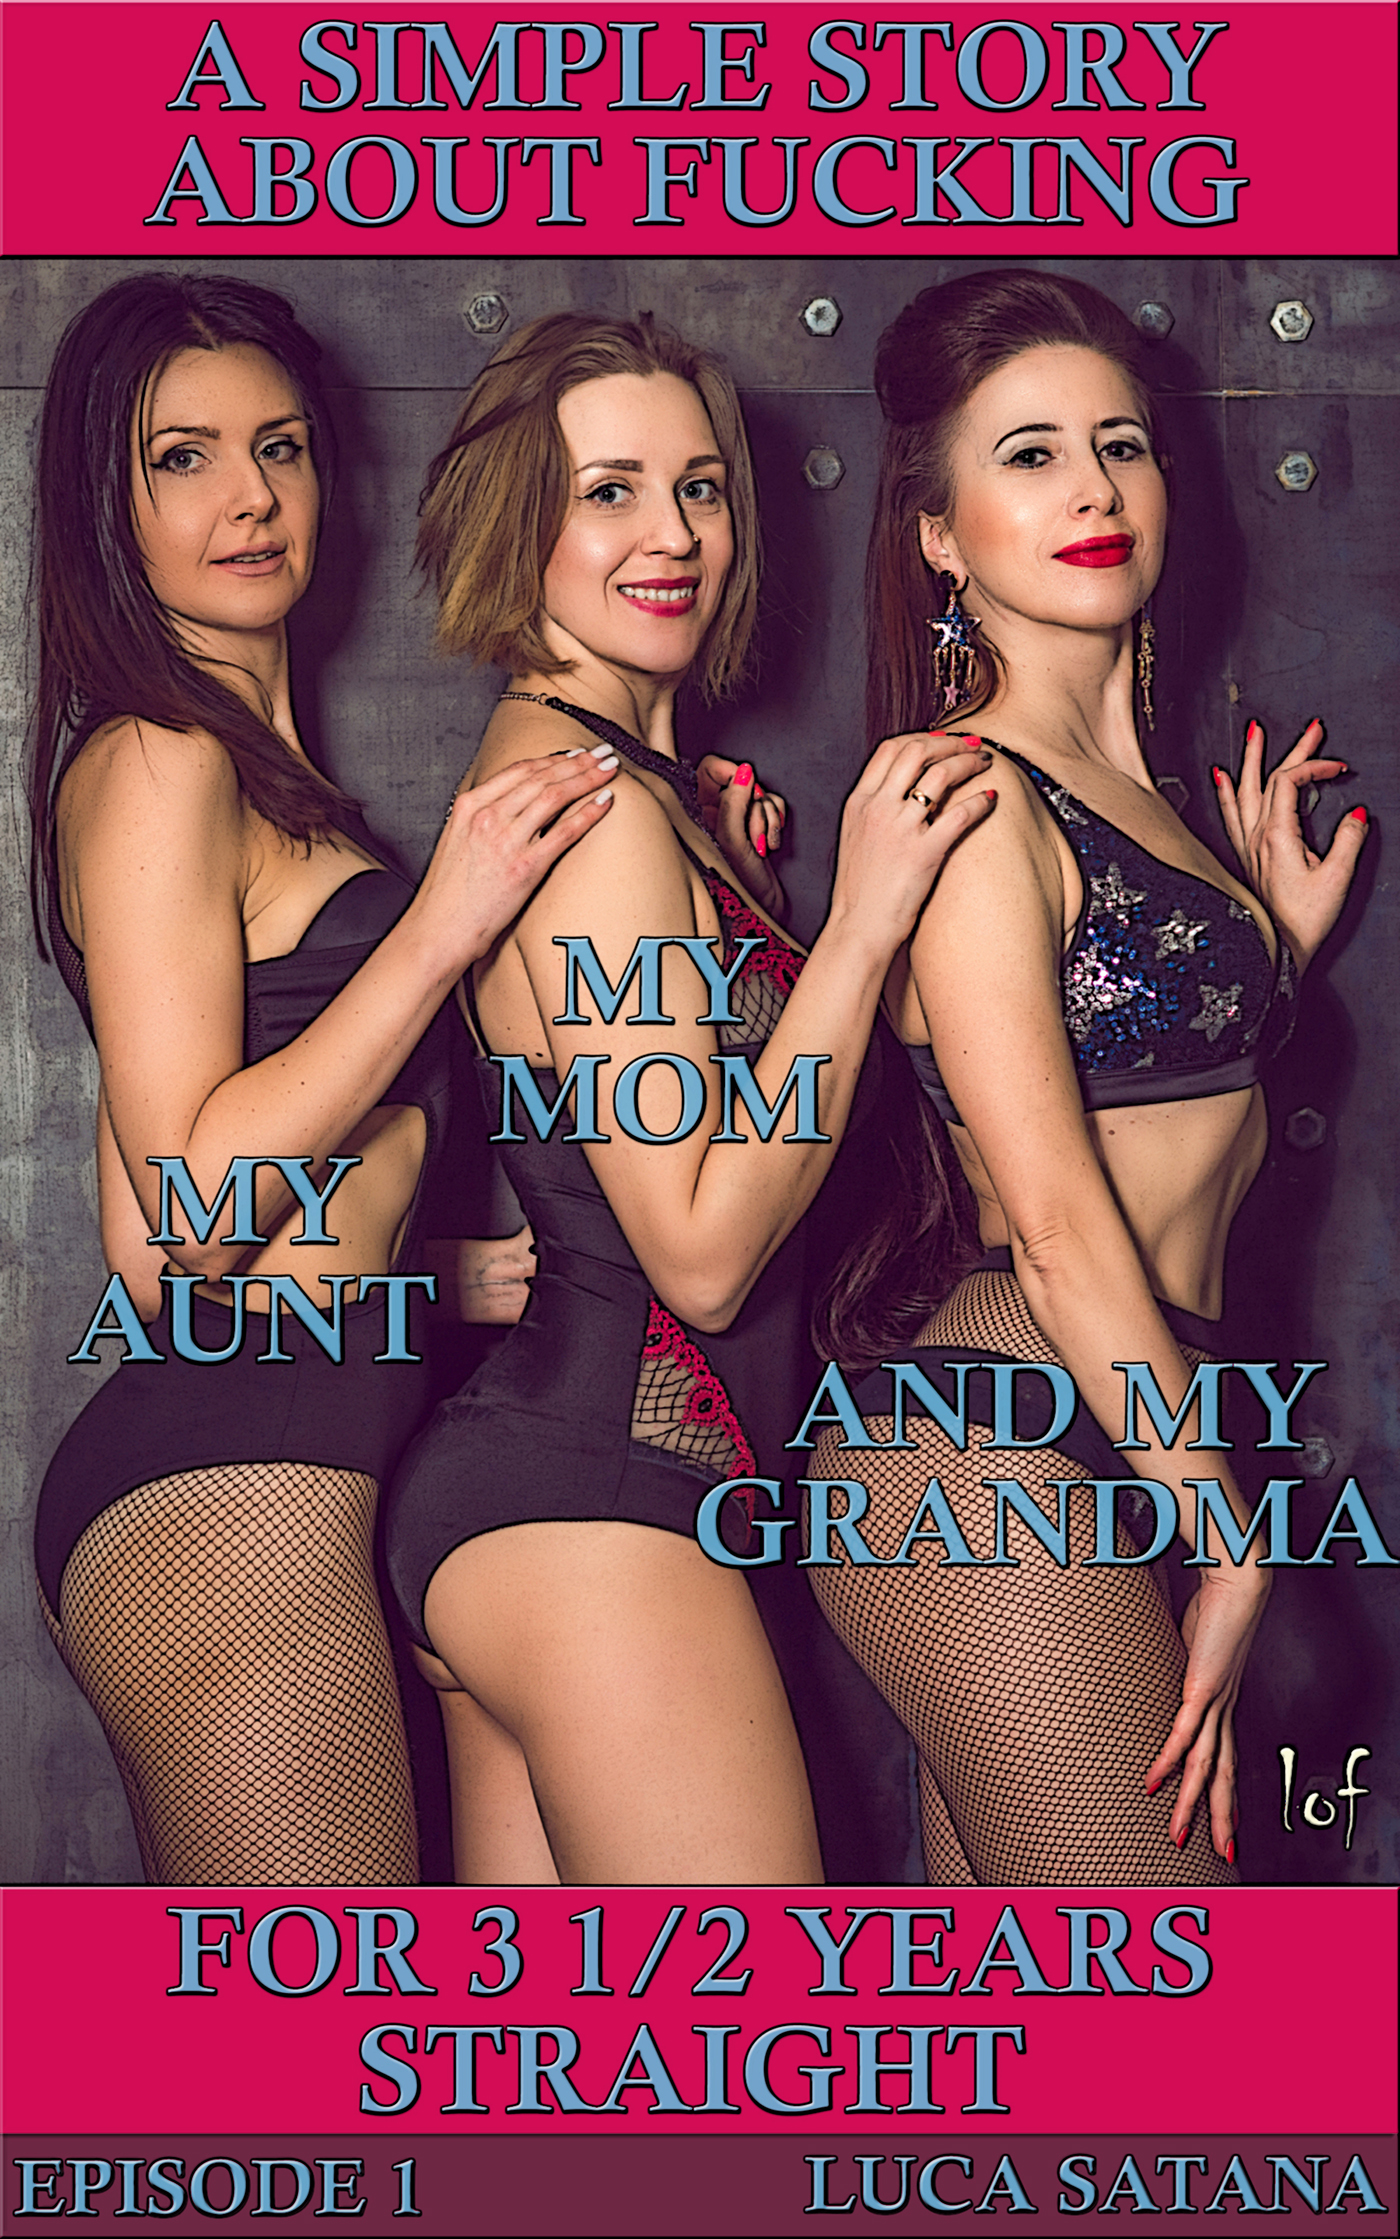 A Simple Story About Fucking My Mom, My Aunt, And My Grandma For 3 1/2 Years Straight: Episode 1